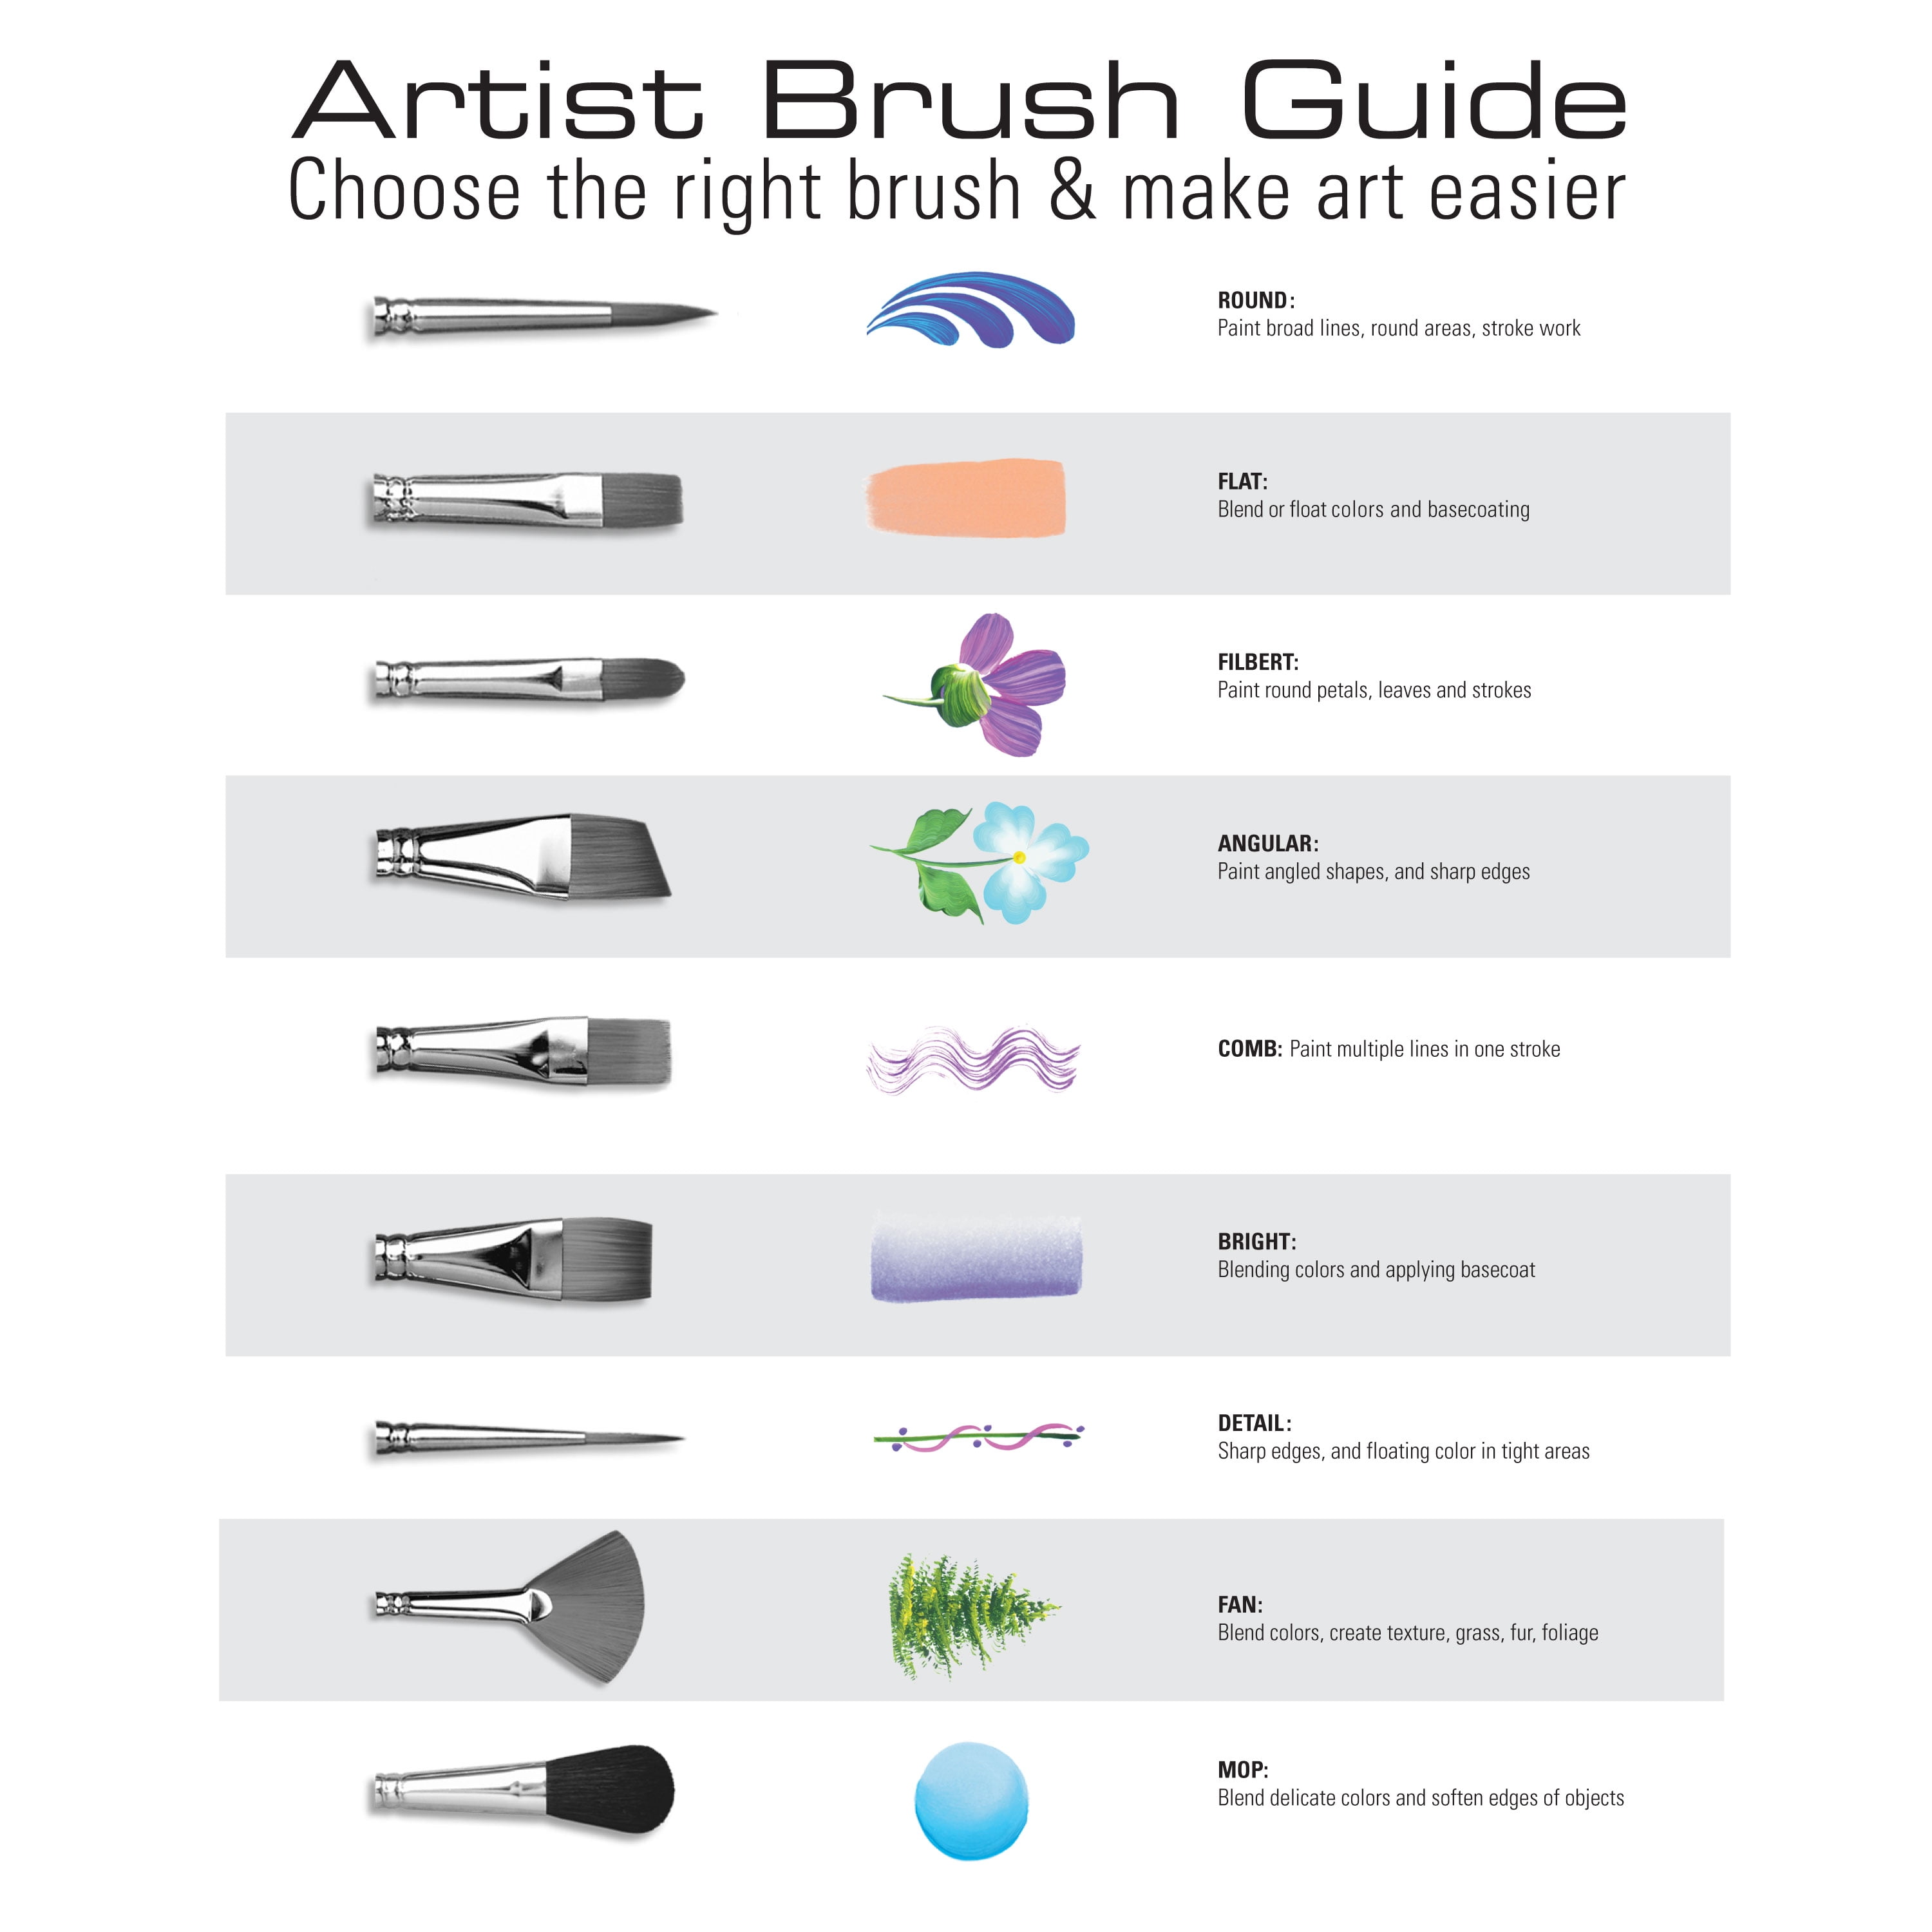 Finding the Right Paint Brush for your Chosen Technique